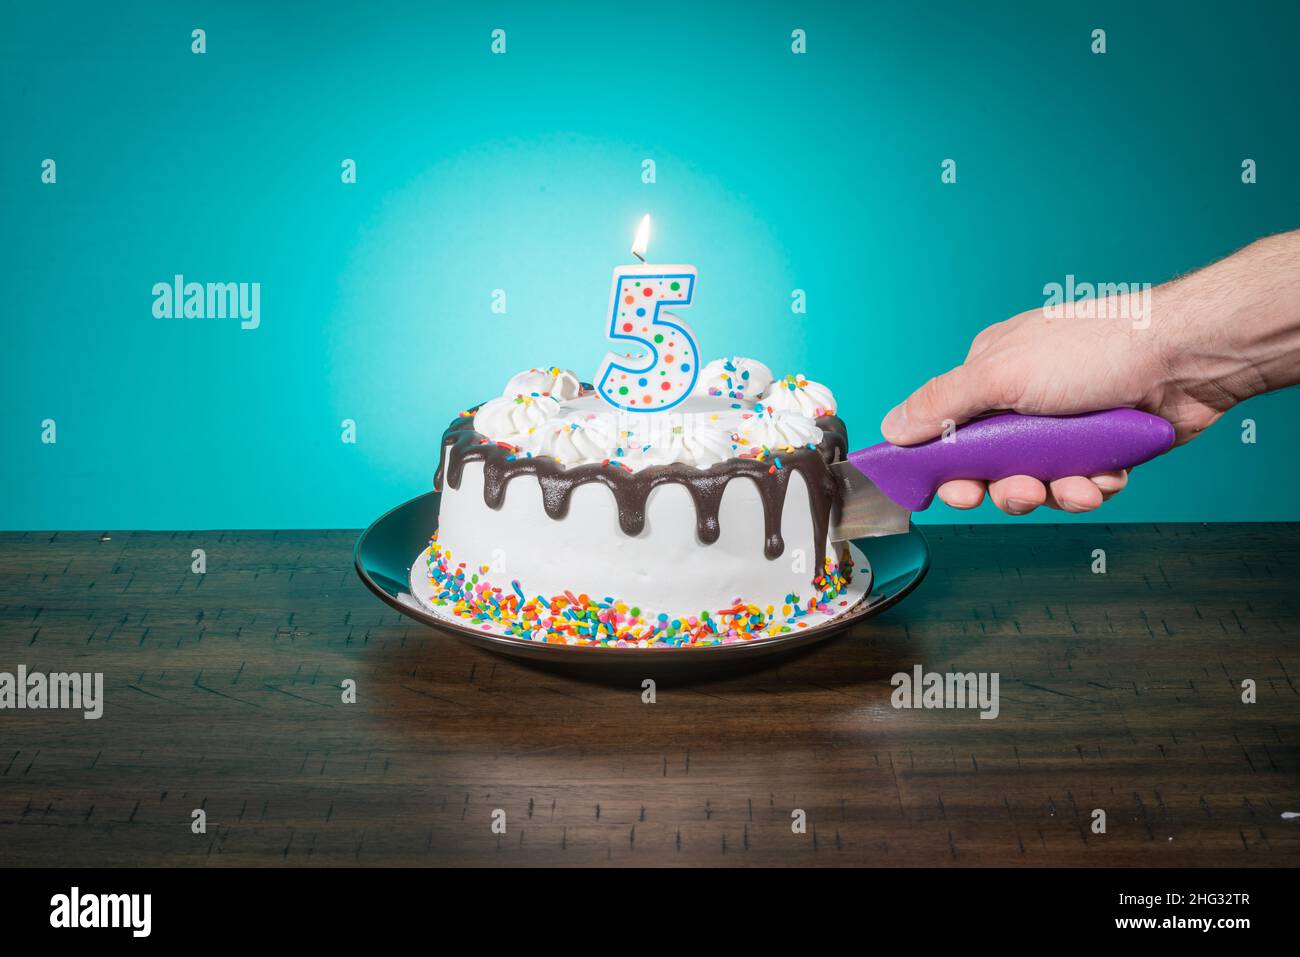 A birthday cake bears a candle in the shape of the number 5 while a hand cuts a slice. Stock Photo